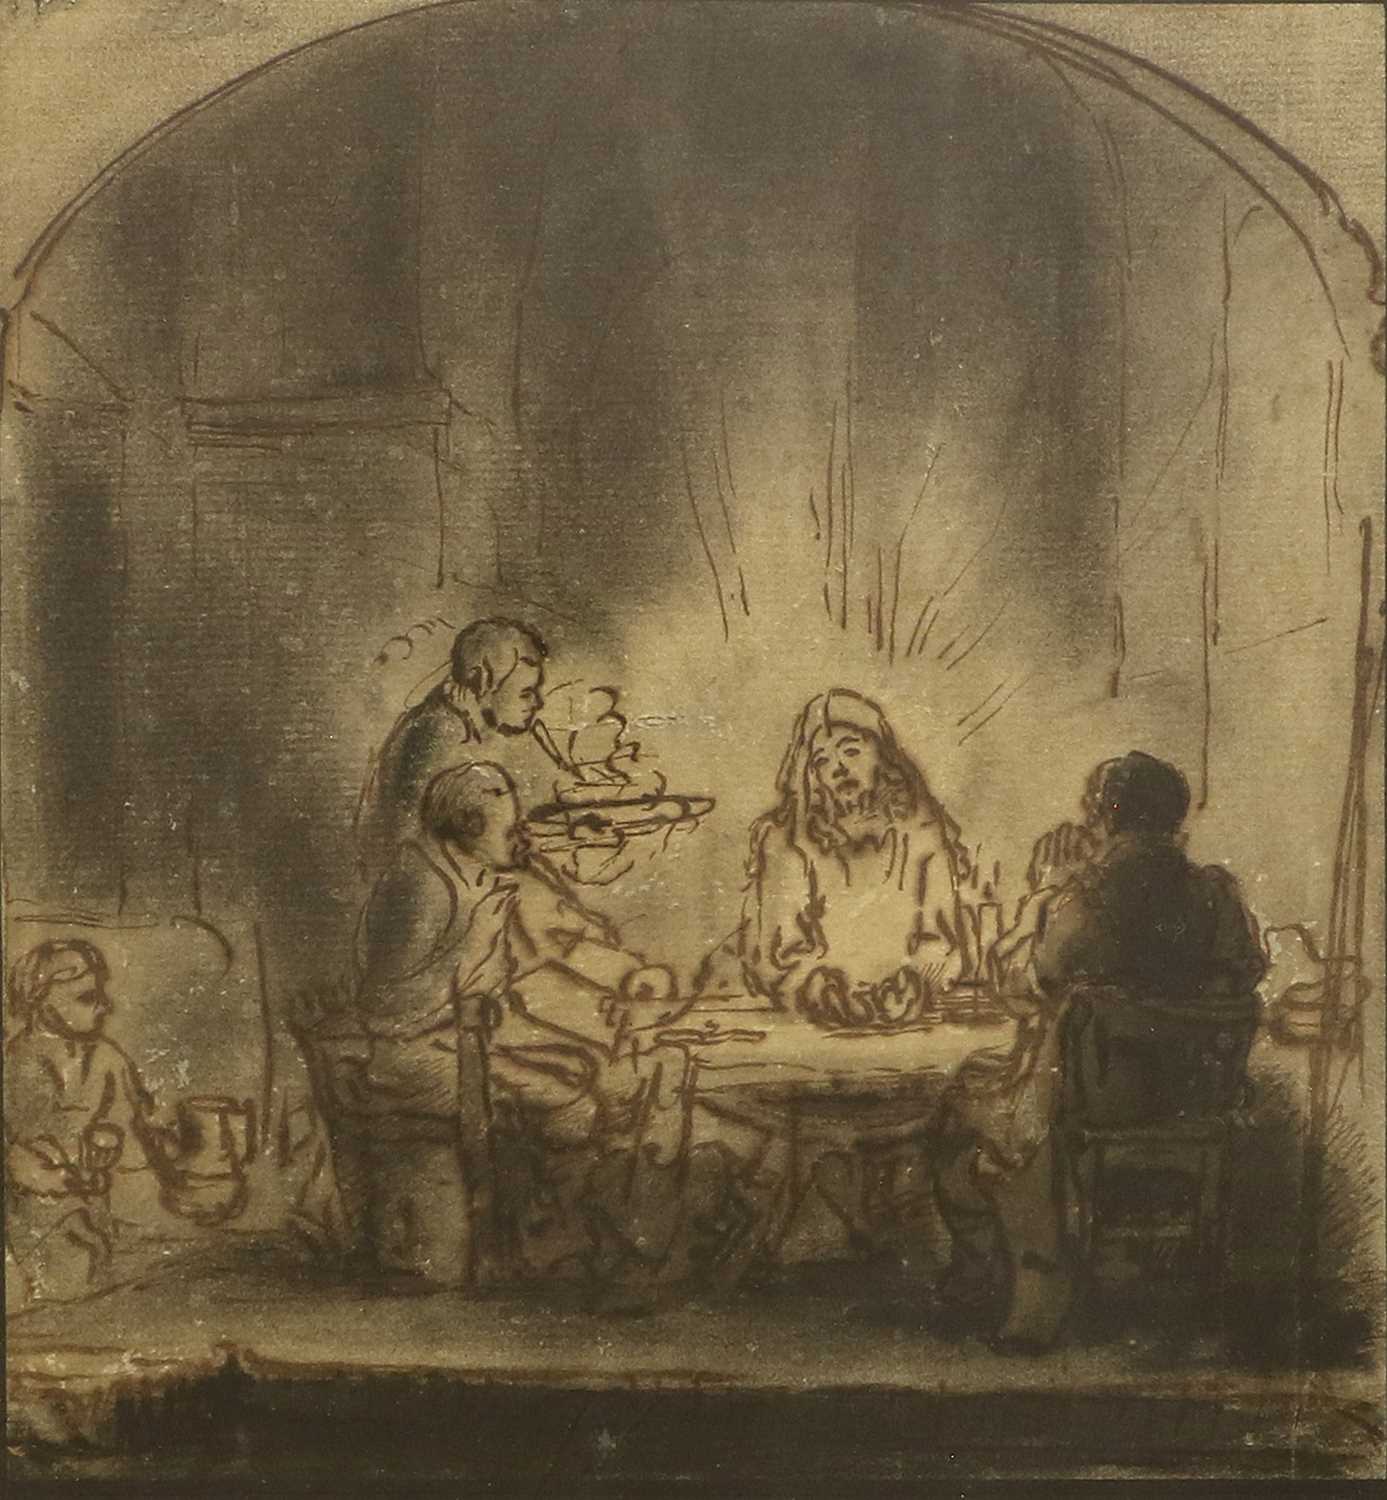 Follower of Rembrandt (1606-1669) Dutch Supper at Emmaus Ink and wash, 19cm by 18cm A flat, even